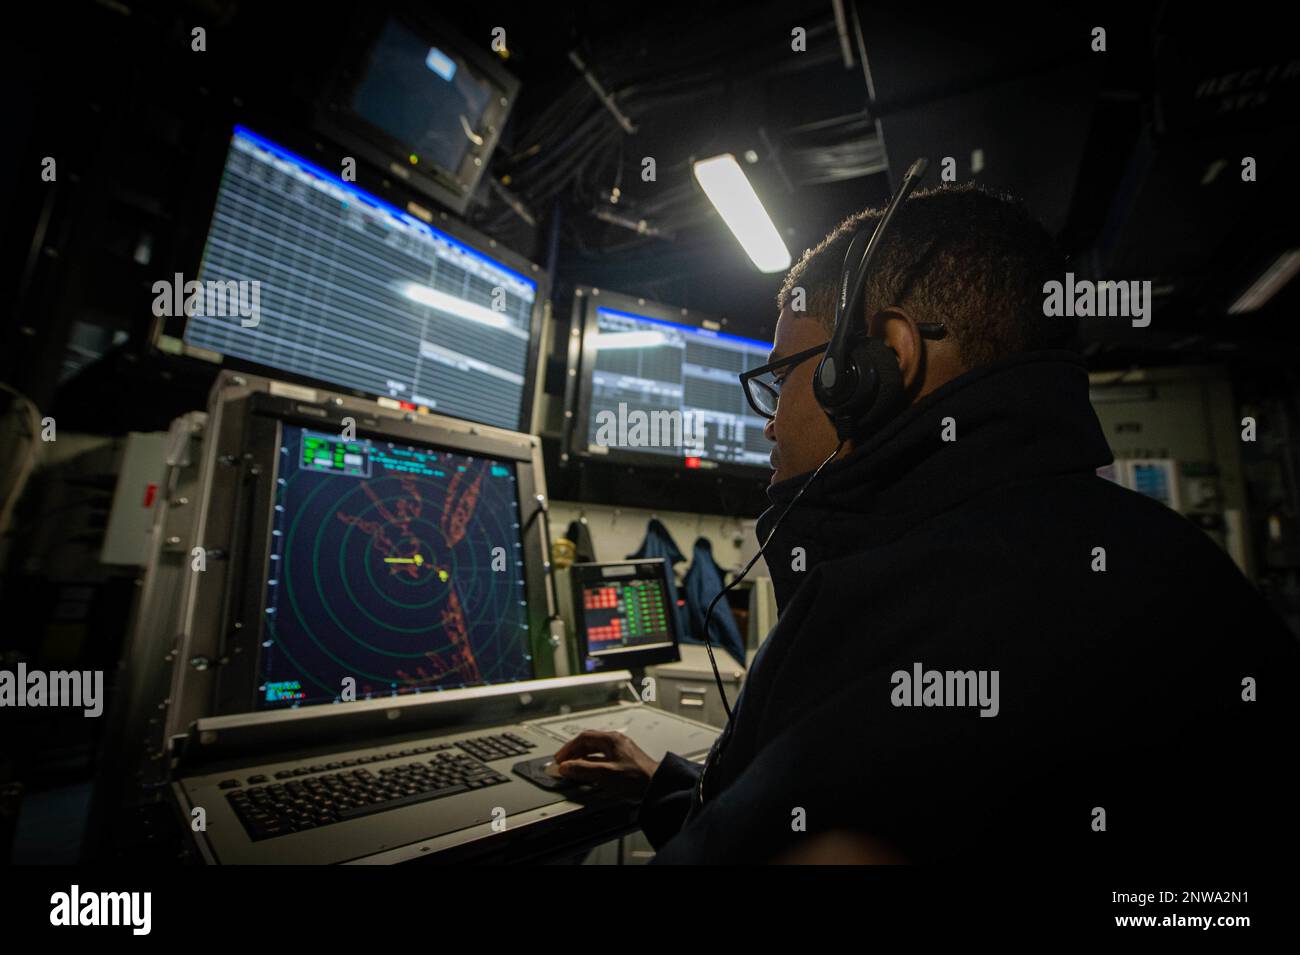 230111-N-JC256-1075 NORFOLK, Va. (Jan. 11, 2023) Air Traffic Controlman Airman Recruit Yovanny Acosta, from Jacksonville, Florida, receives training on aircraft recovery aboard the Nimitz-class aircraft carrier USS Dwight D. Eisenhower (CVN 69). IKE is currently pier side in Naval Station Norfolk conducting routine maintenance. Stock Photo